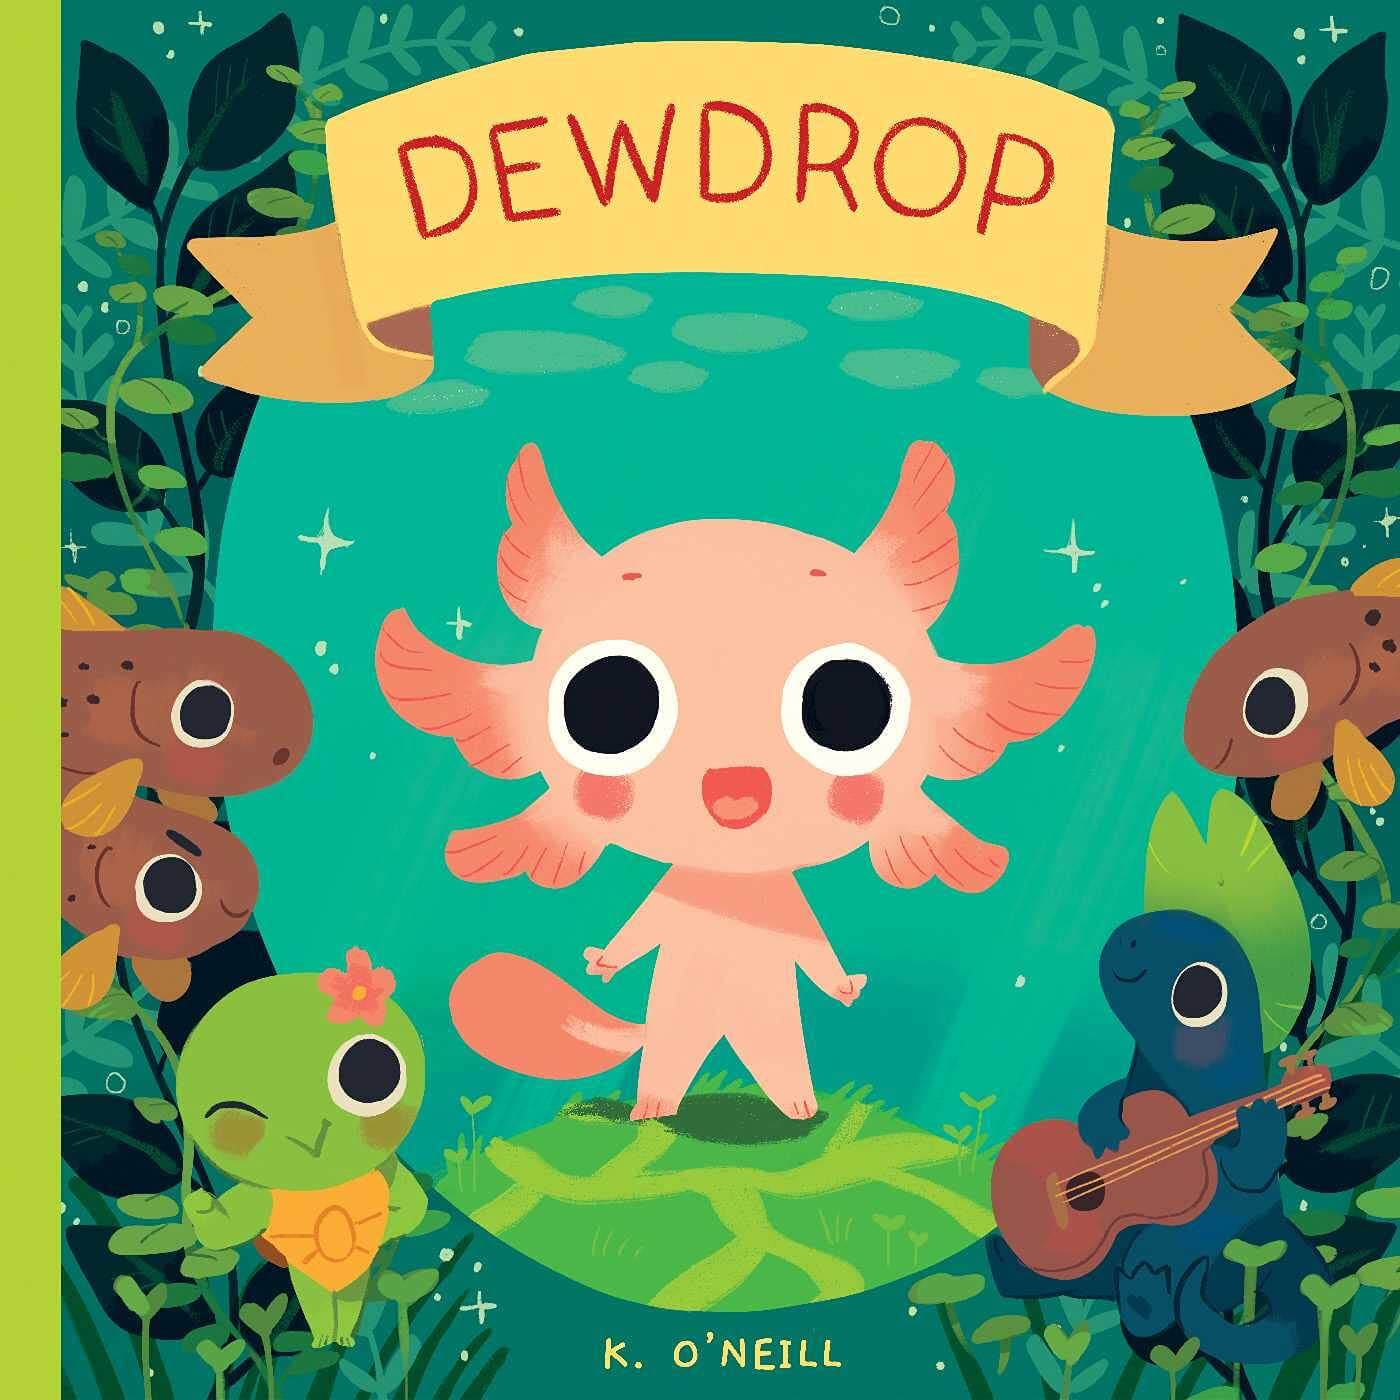 Cover for 'Dewdrop' by Katie O'Neil